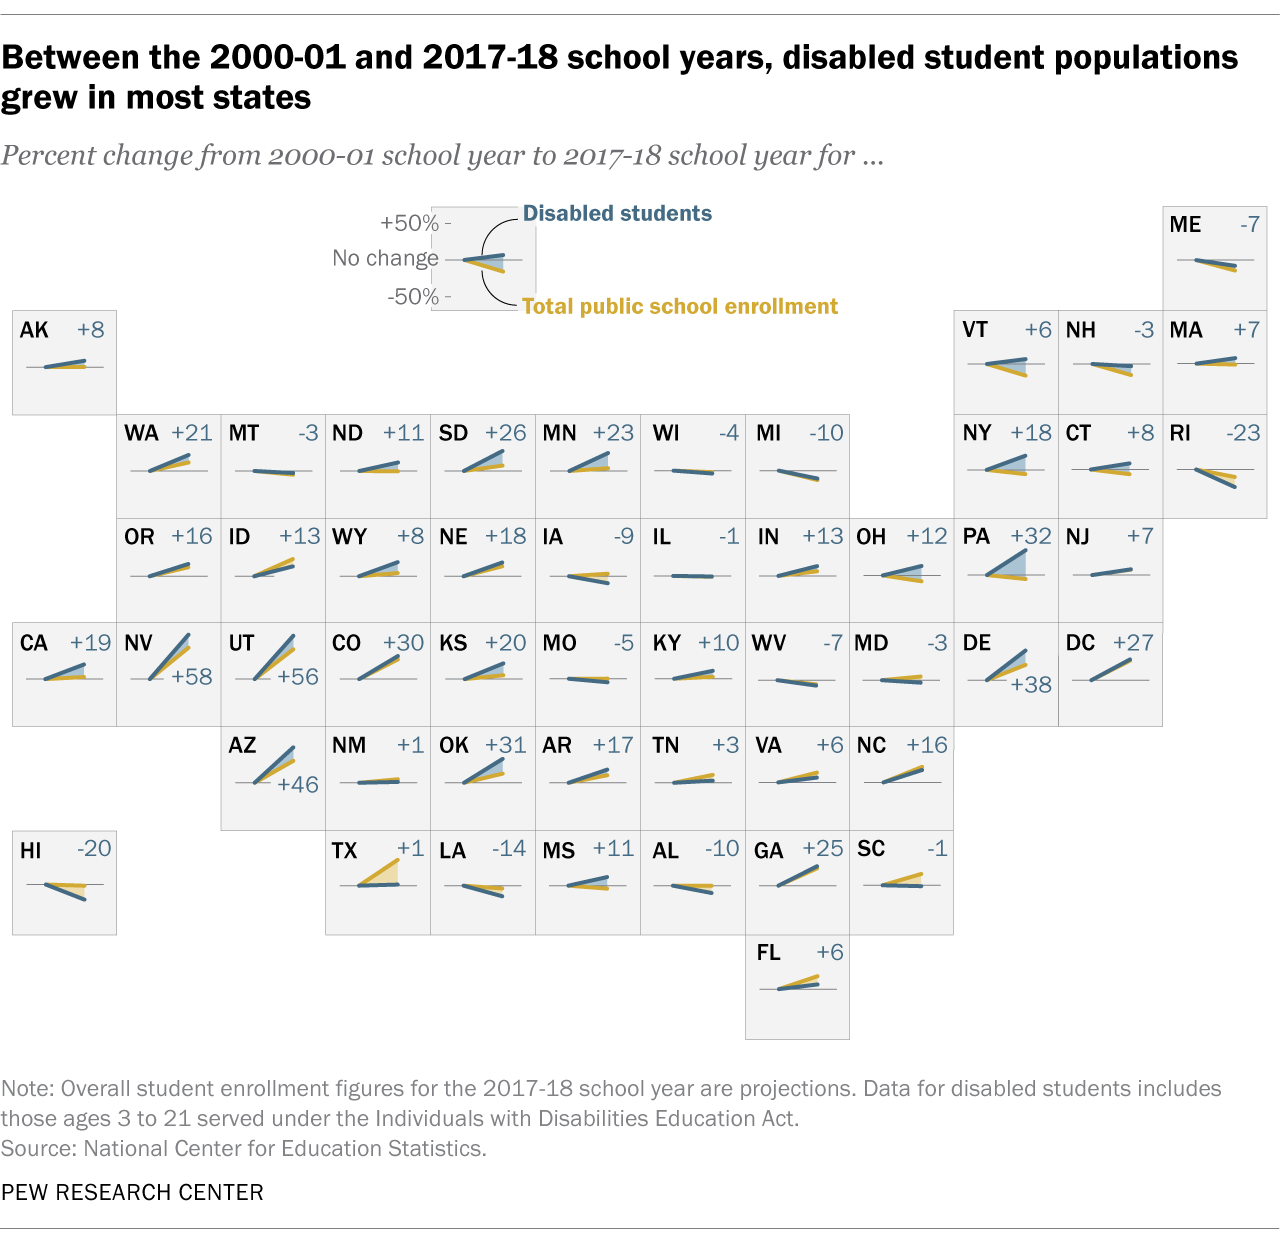 Between the 2000-01 and 2017-18 school years, disabled student populations grew in most states